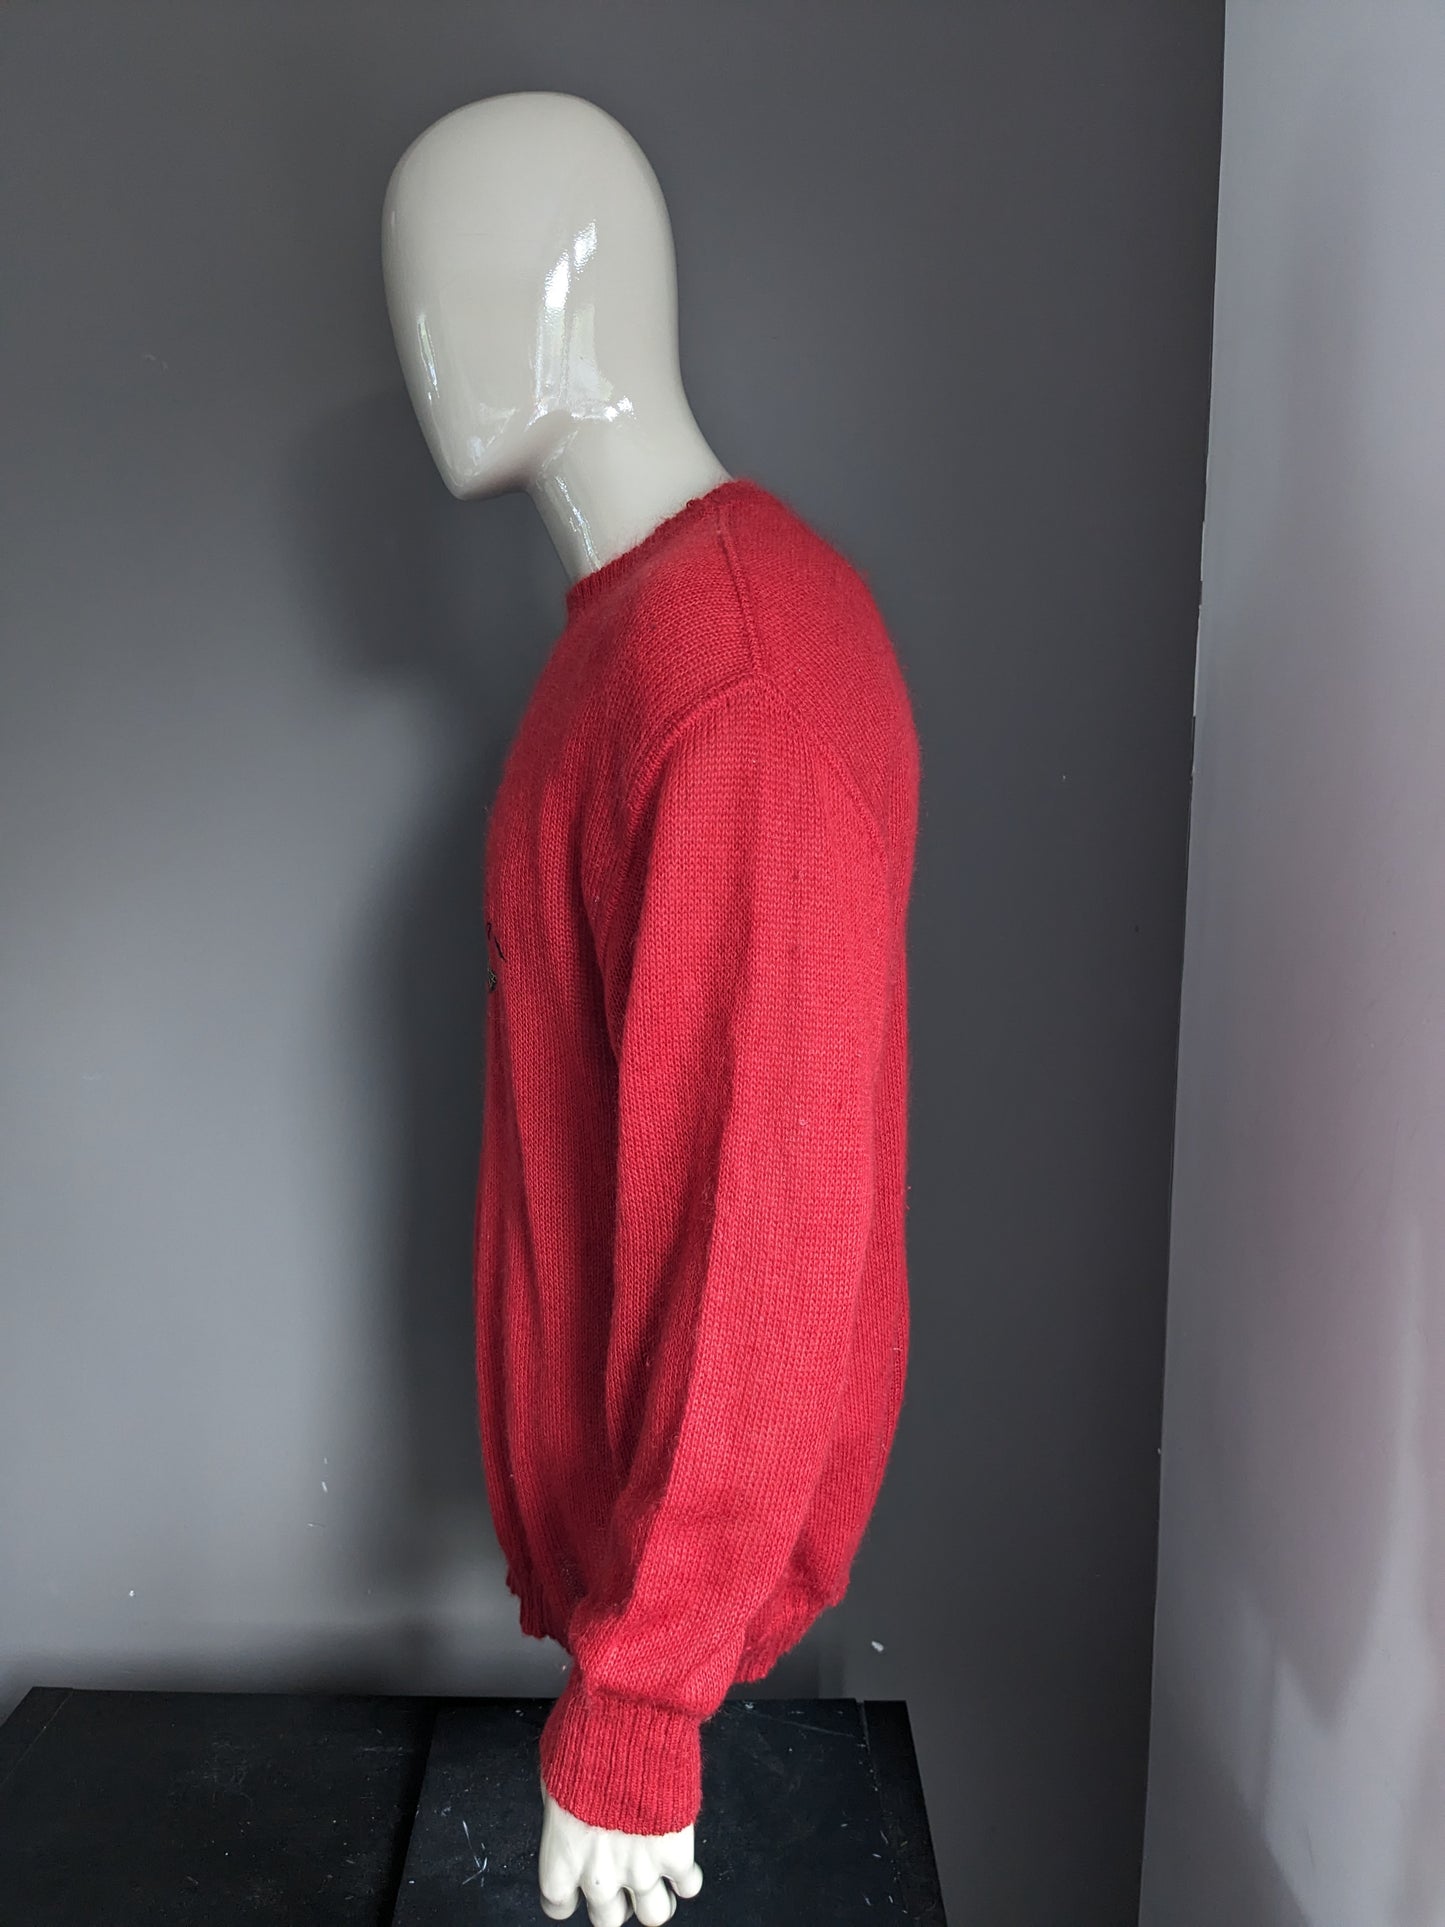 Vintage märz mohair wool sweater. Red colored with application front. Size XL.